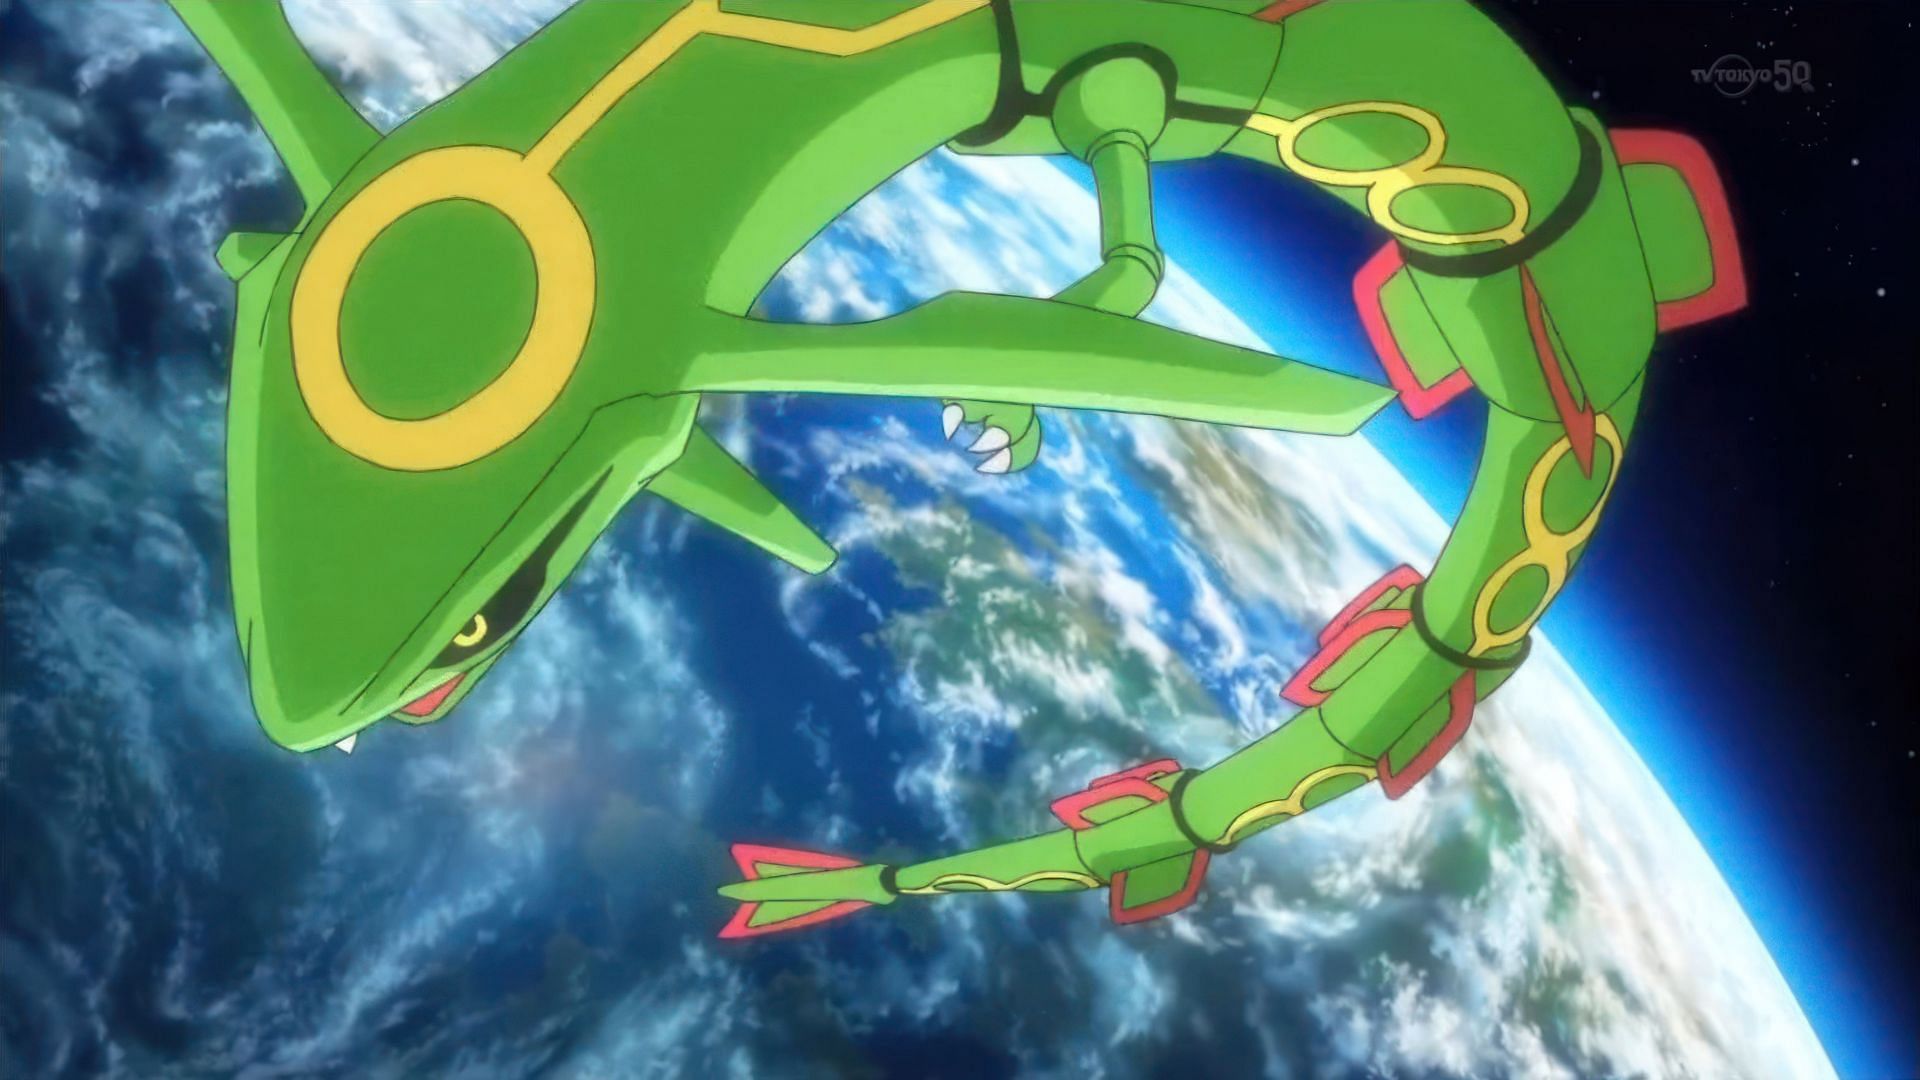 Rayquaza, as seen in the anime (Image via The Pokemon Company)